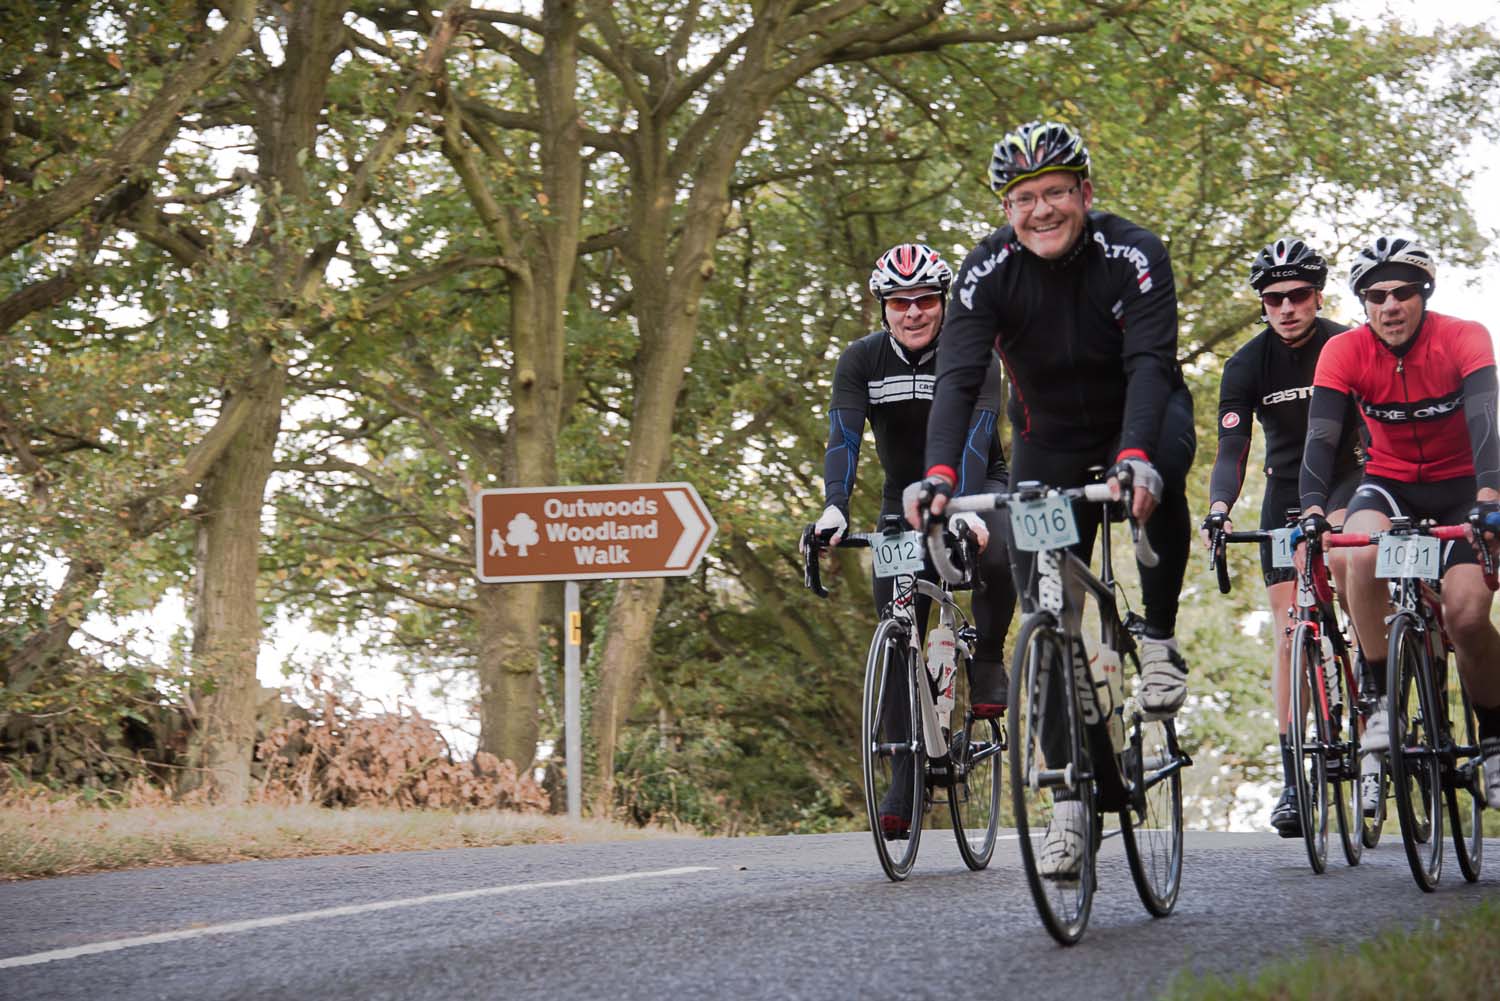 A group of cyclists rides past a sign saying "Outwoods Woodland Walk"